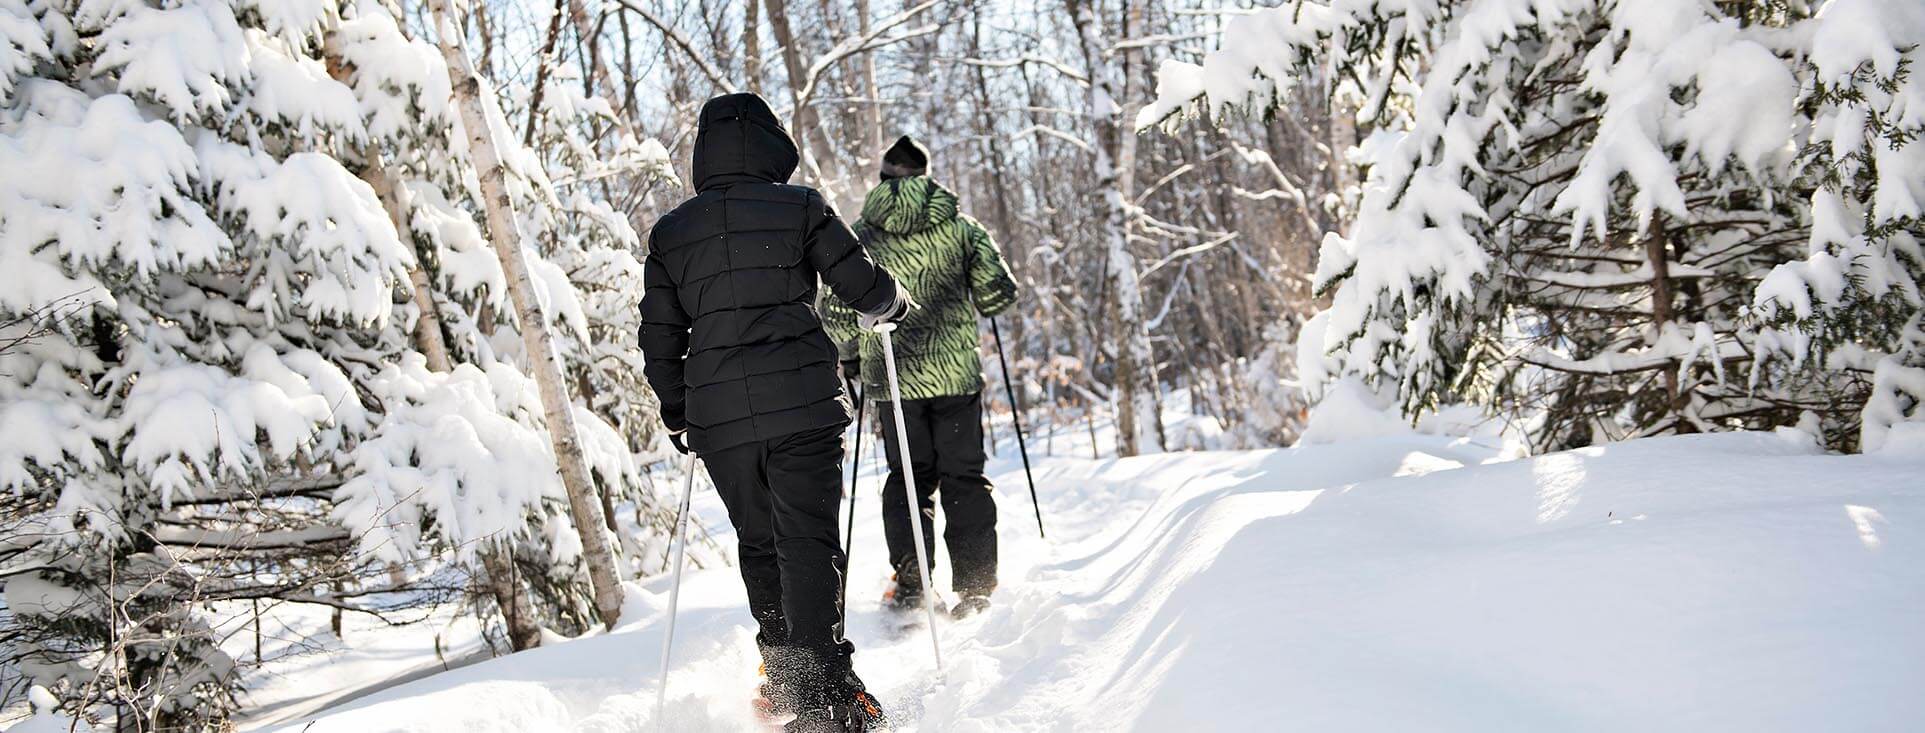 two people snowshoeing in winter.